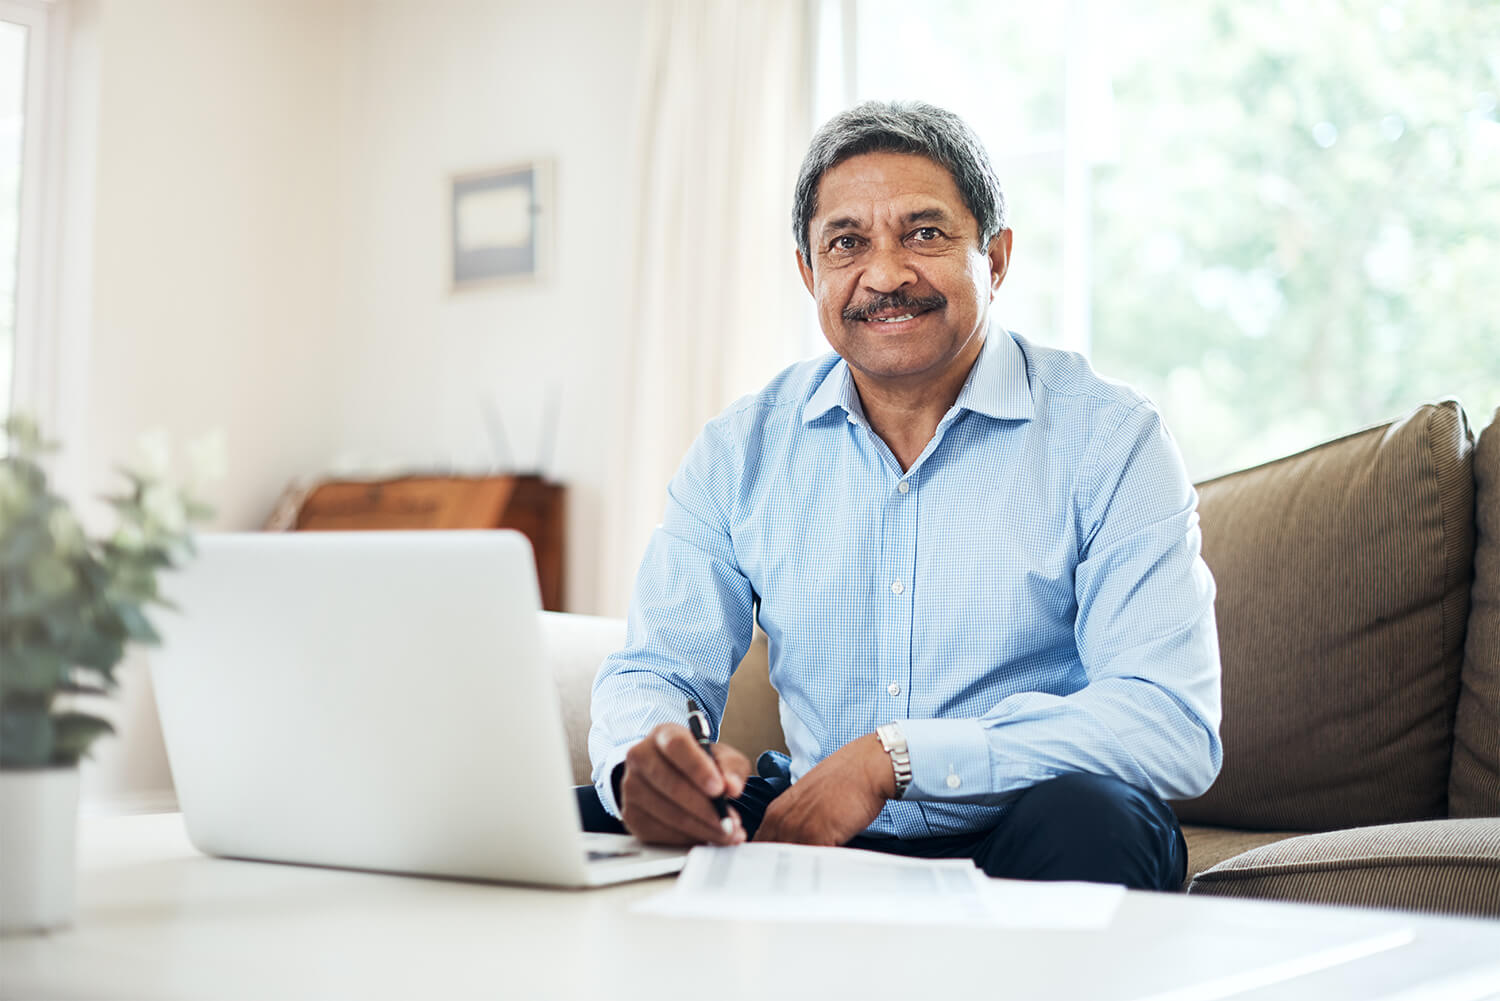 A man sits on a couch with a laptop on the coffee table, holding a pen and smiling. The Clarkson Firm helps people in Alabama get Social Security Disability Insurance (SSDI) benefits.